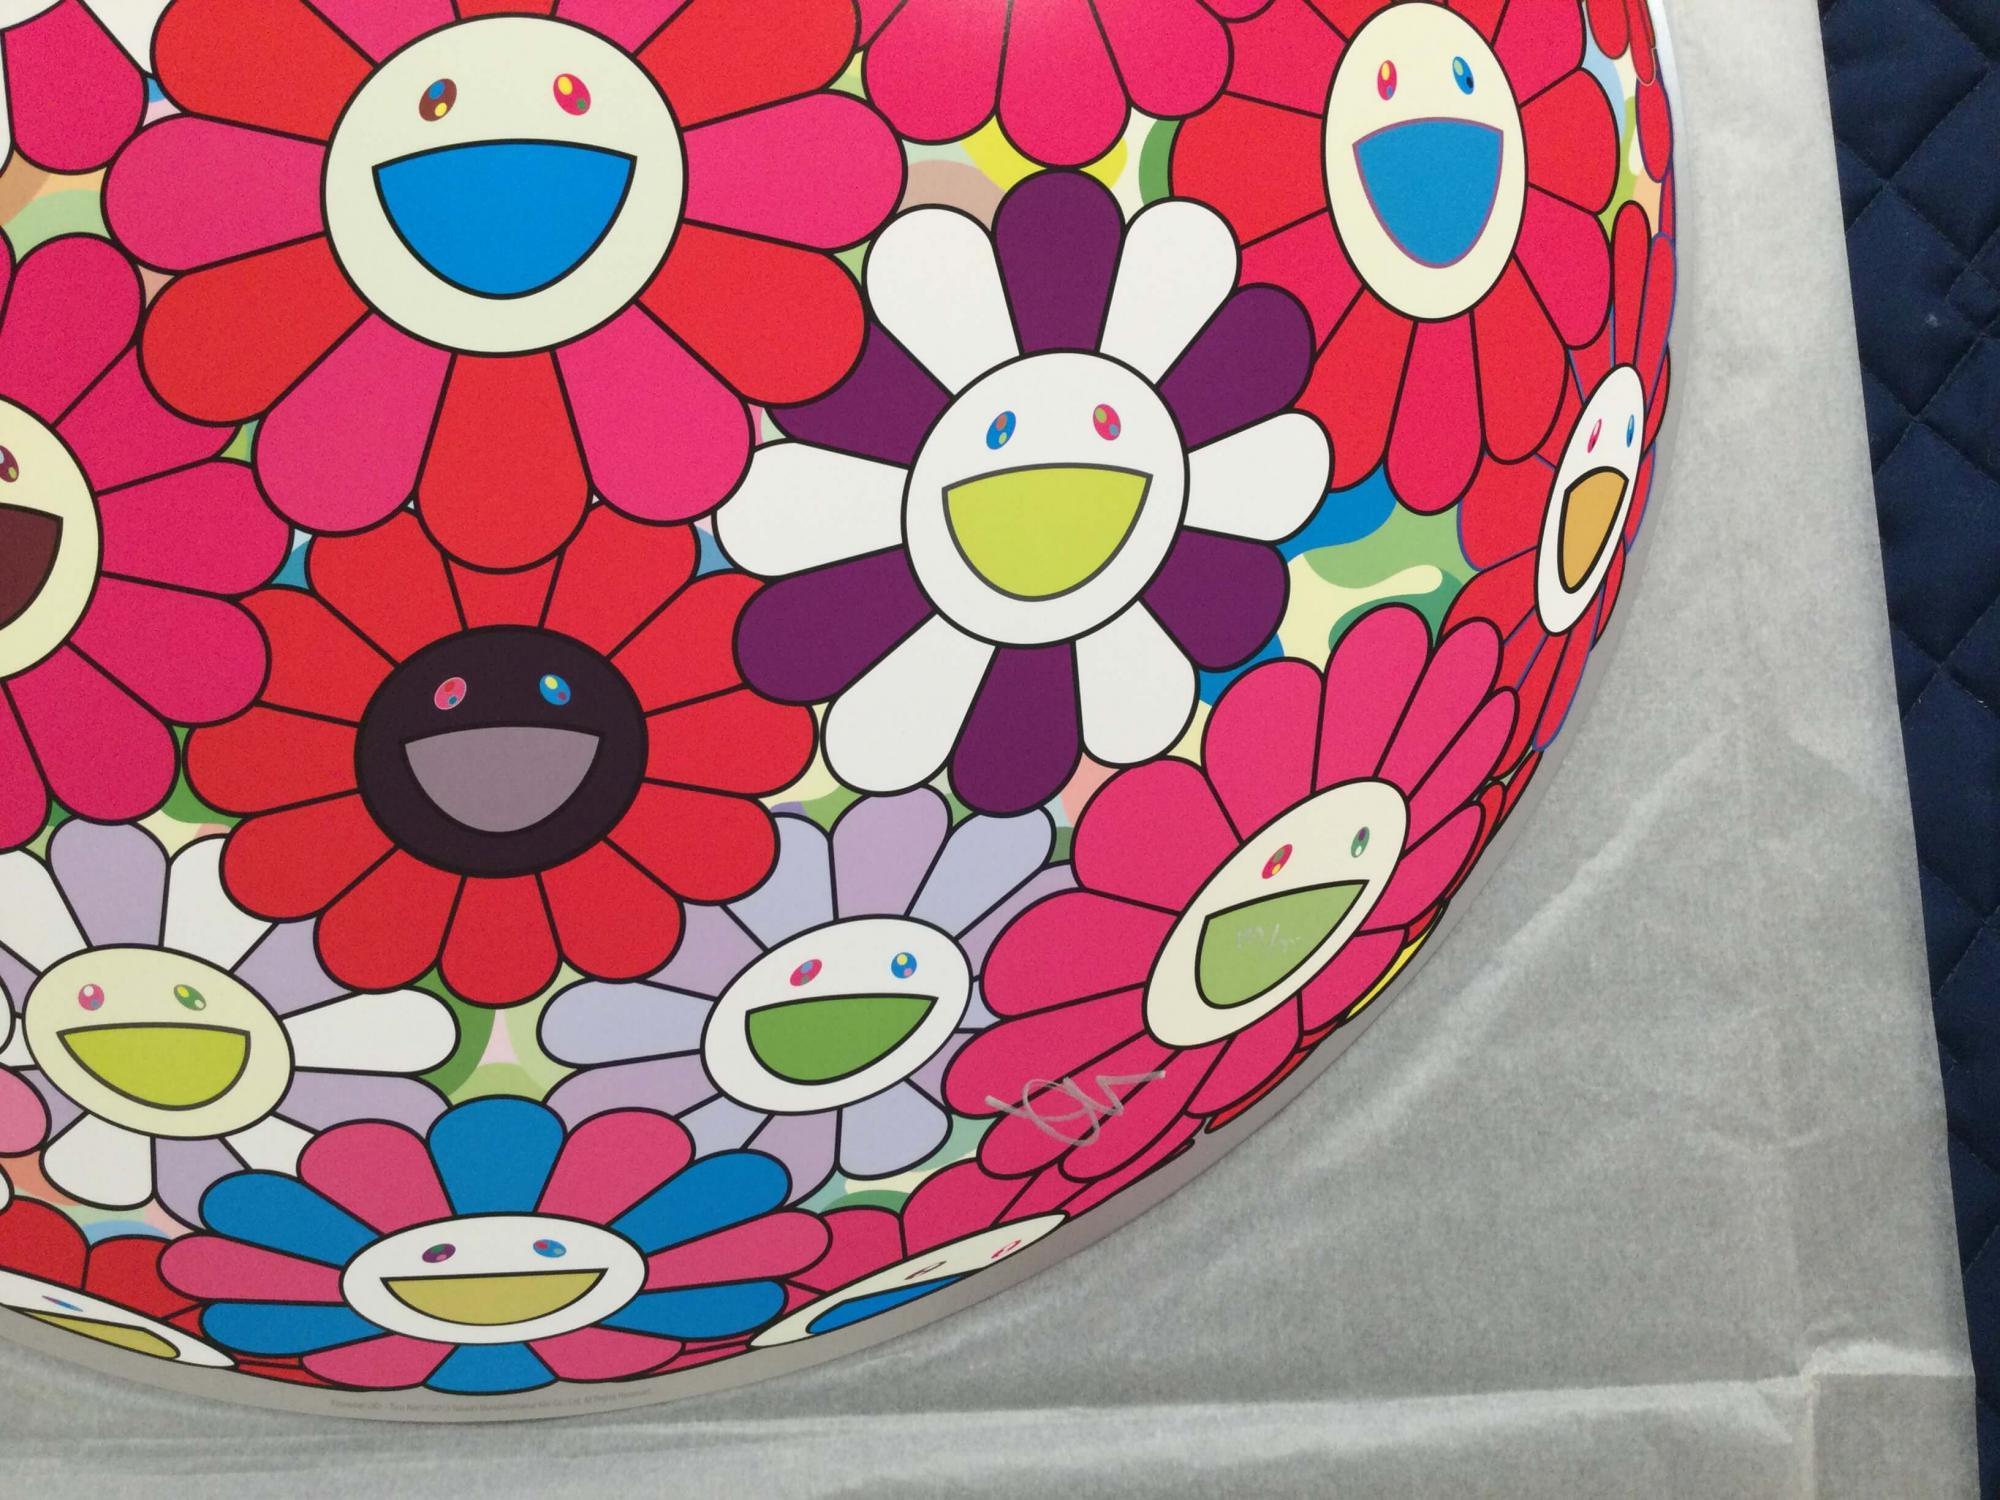 Flowerball (3D) - Turn Red!, 2013 by Takashi Murakami
Woven paper, four-color offset print, cold foil stamp, glossy varnish
Published by Kaikai Kiki Co., Ltd., Tokyo
28 in diameter
71 cm diameter
Edition 67/300

Takashi Murakami is best known for